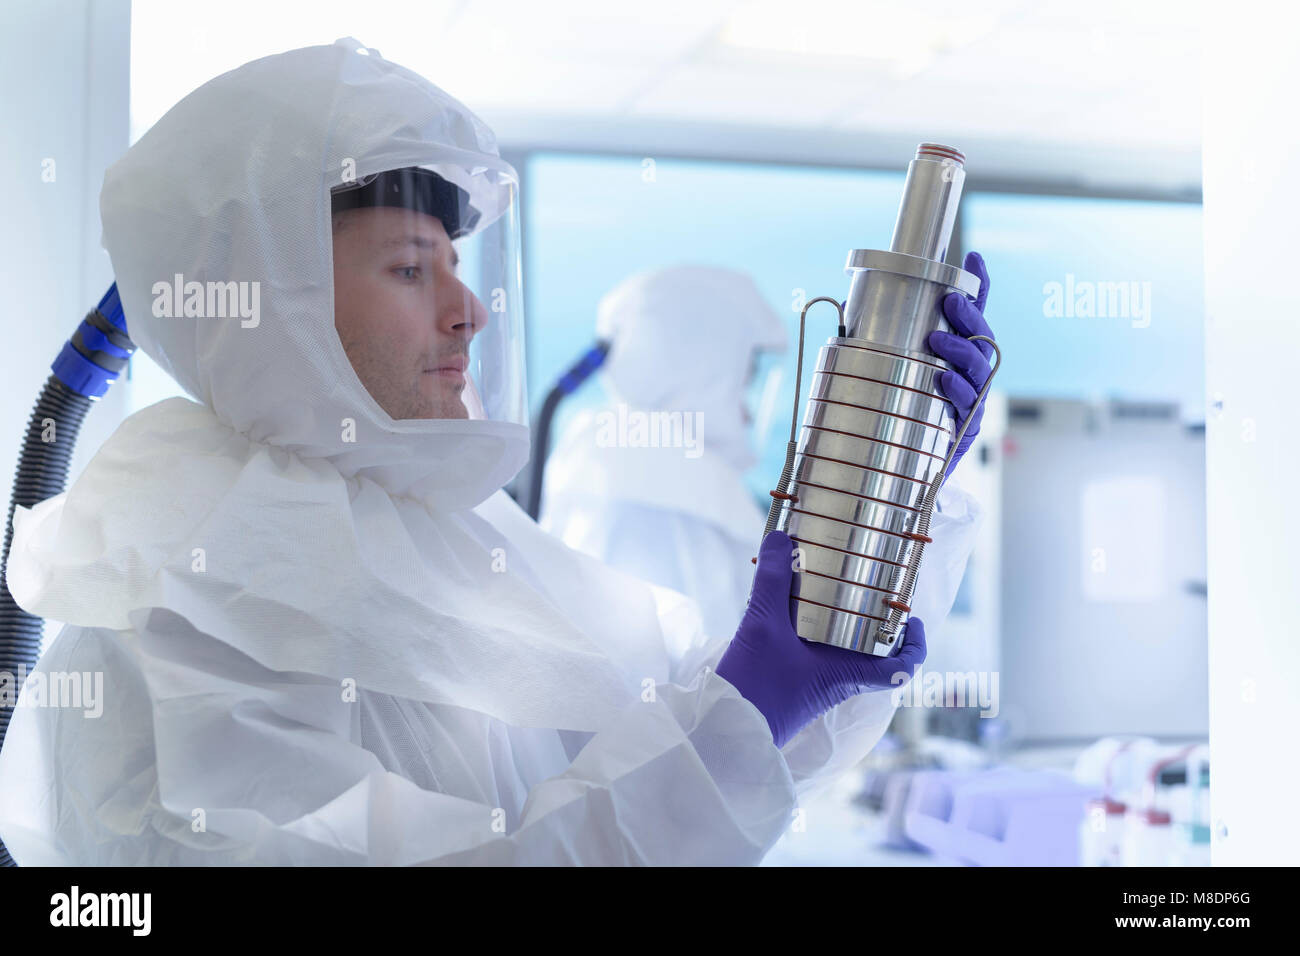 Scientist in protective wear inspecting filter in laboratory Stock Photo